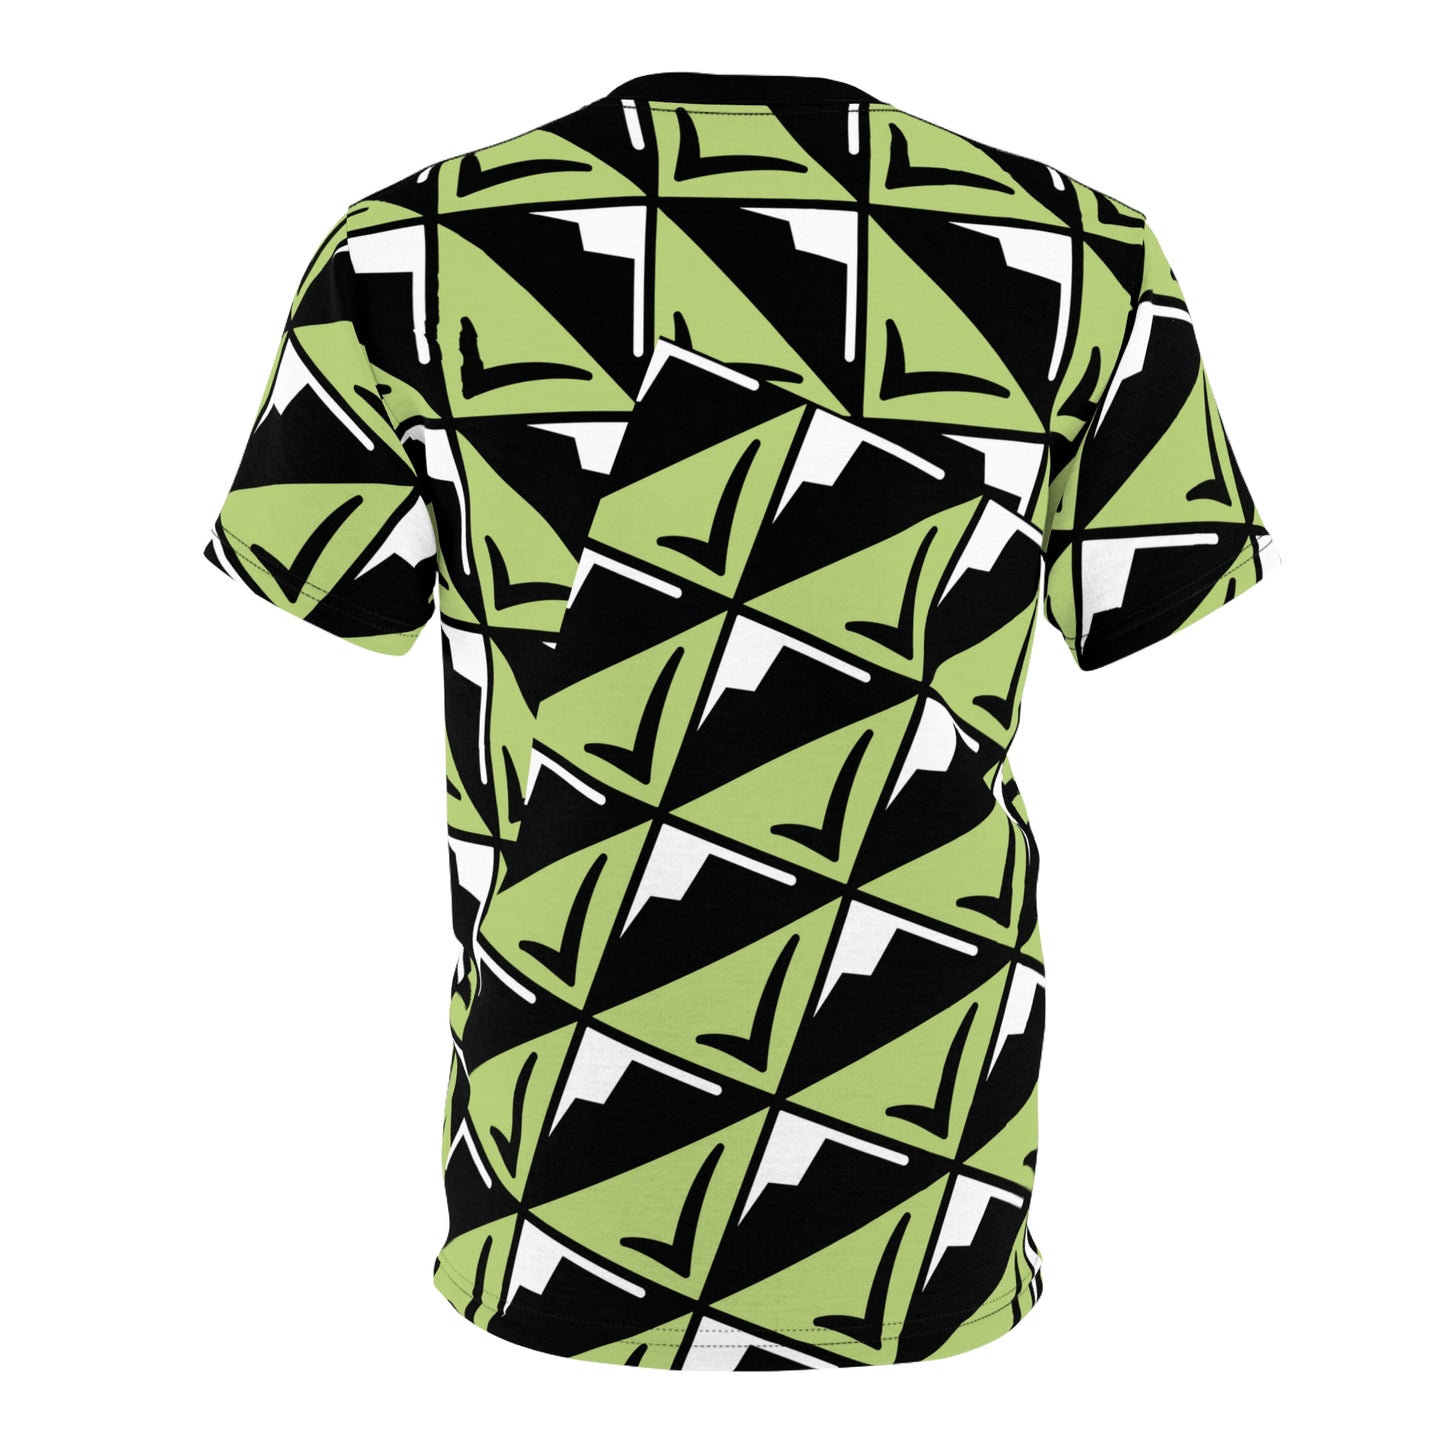 Avalanche Graphic Tee